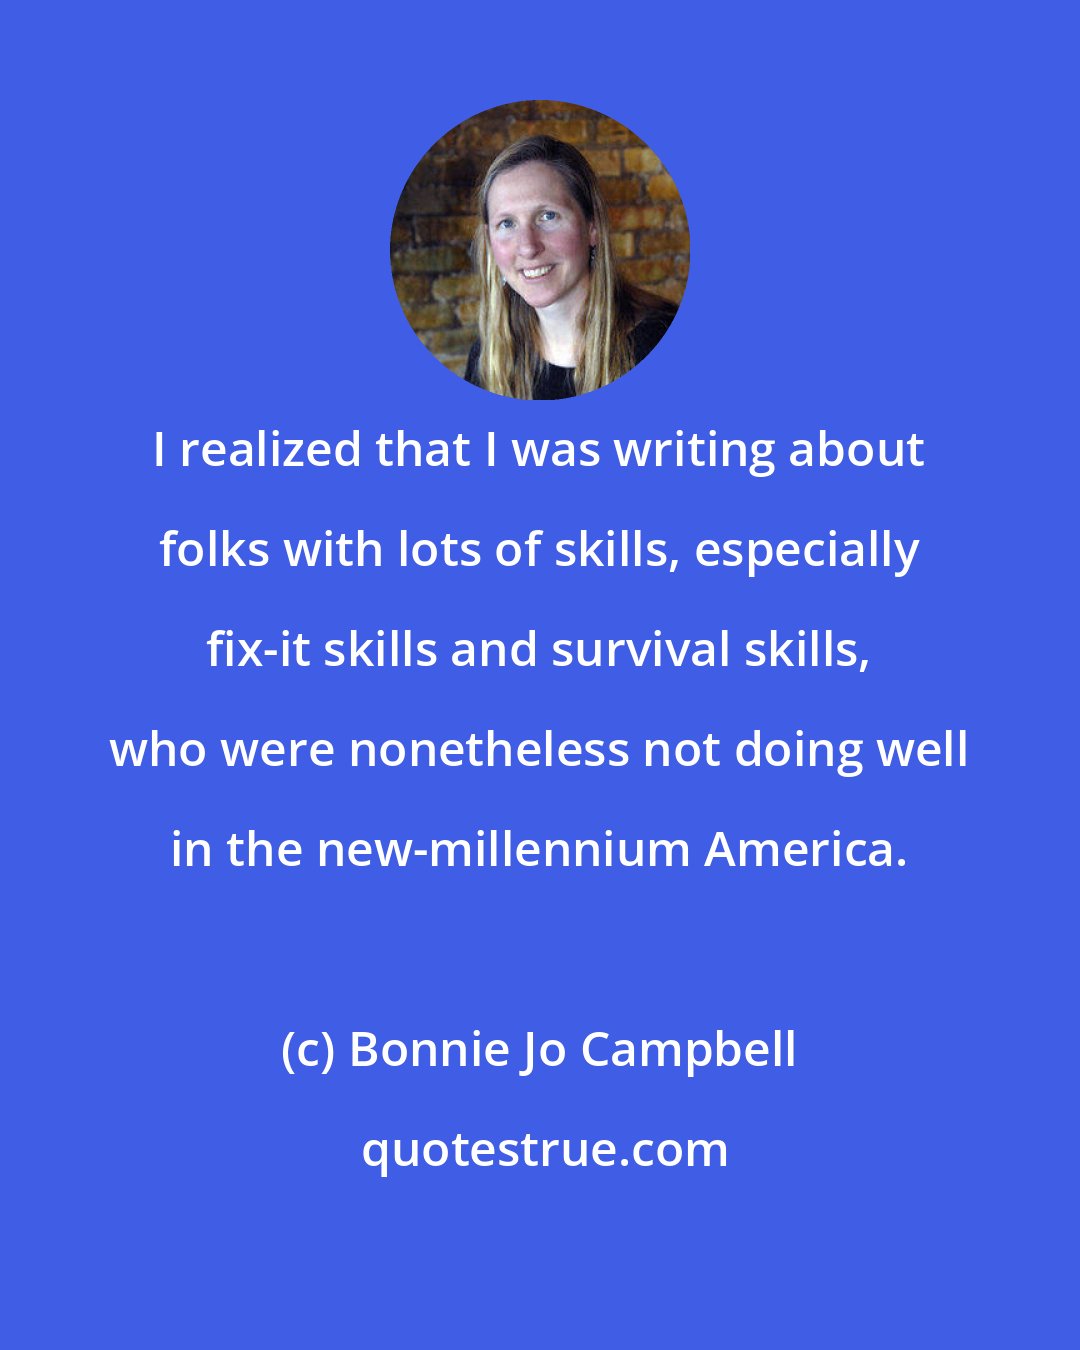 Bonnie Jo Campbell: I realized that I was writing about folks with lots of skills, especially fix-it skills and survival skills, who were nonetheless not doing well in the new-millennium America.